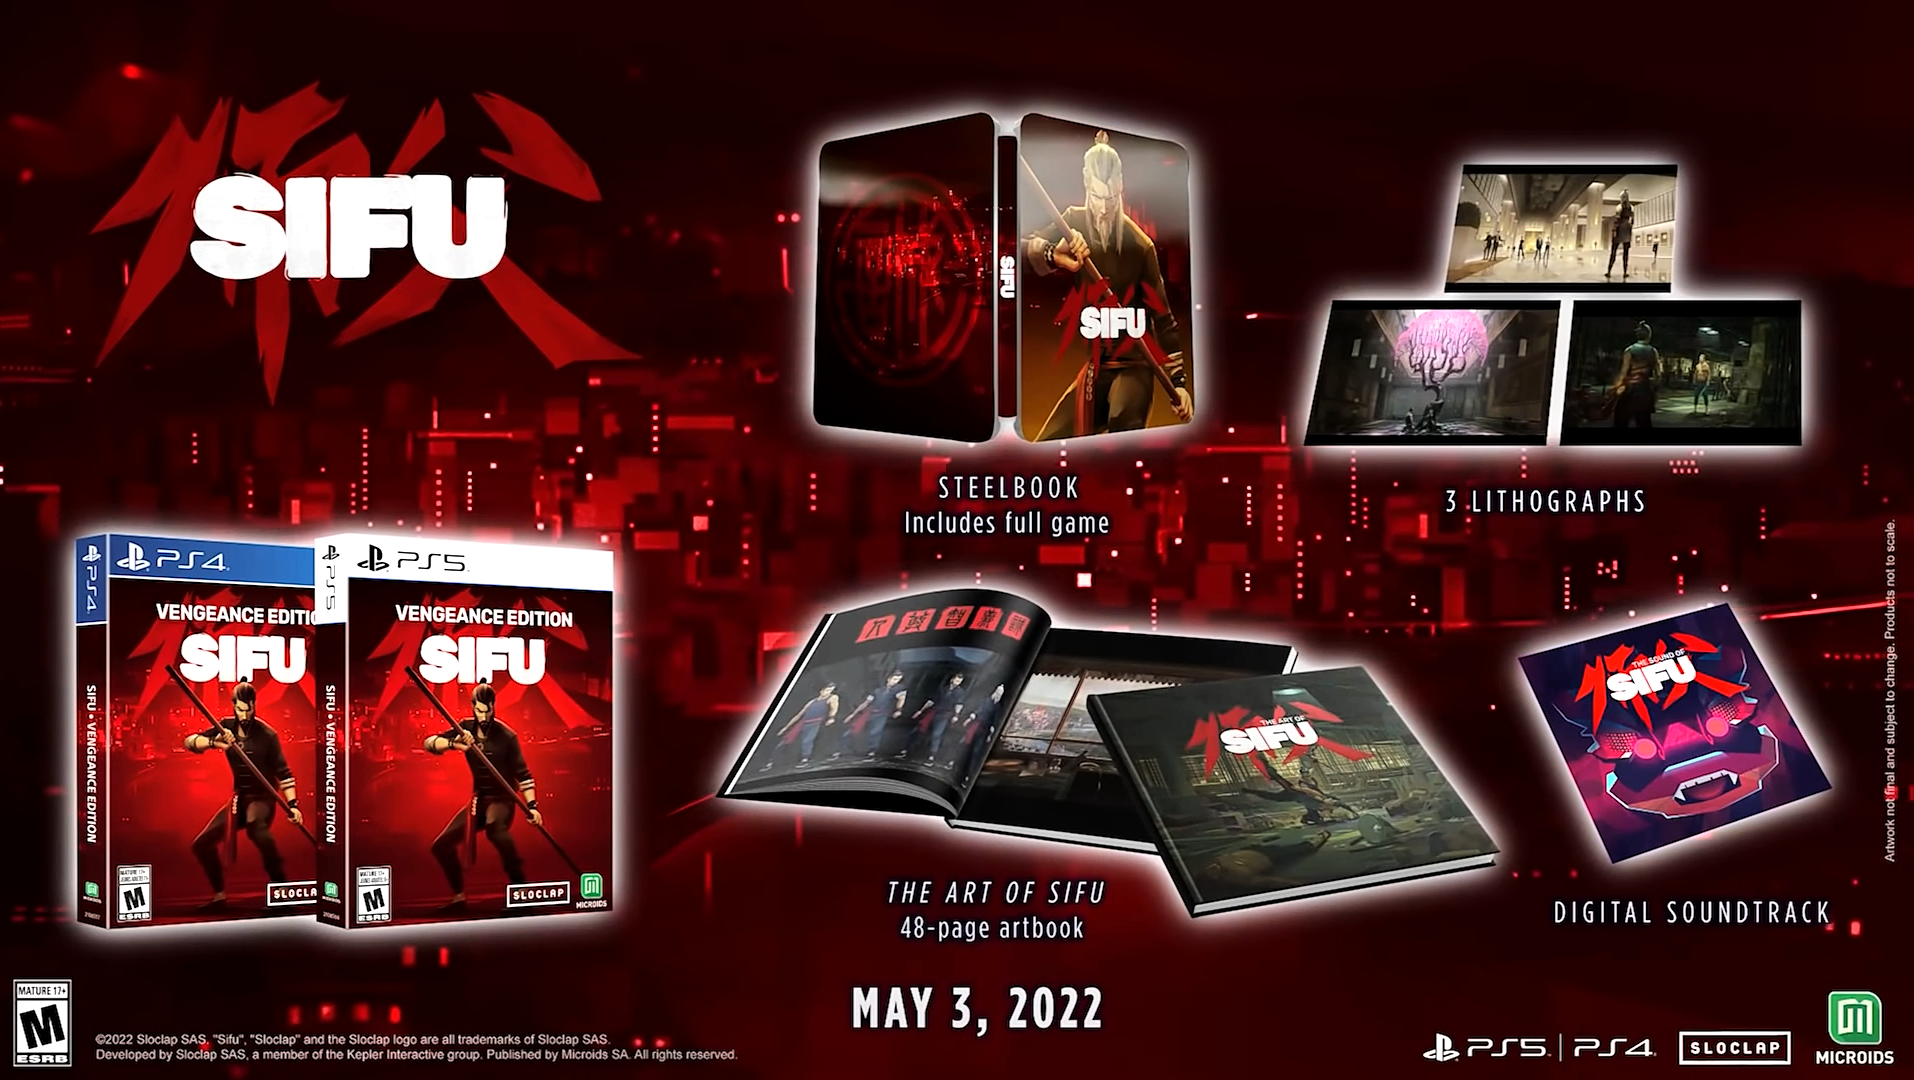 Contents of the Sifu Vengence edition on PS4 and PS5 showing a copy of the game, 48 page artbook, digital soundtrack, 3 lithoraphs and steelbook case